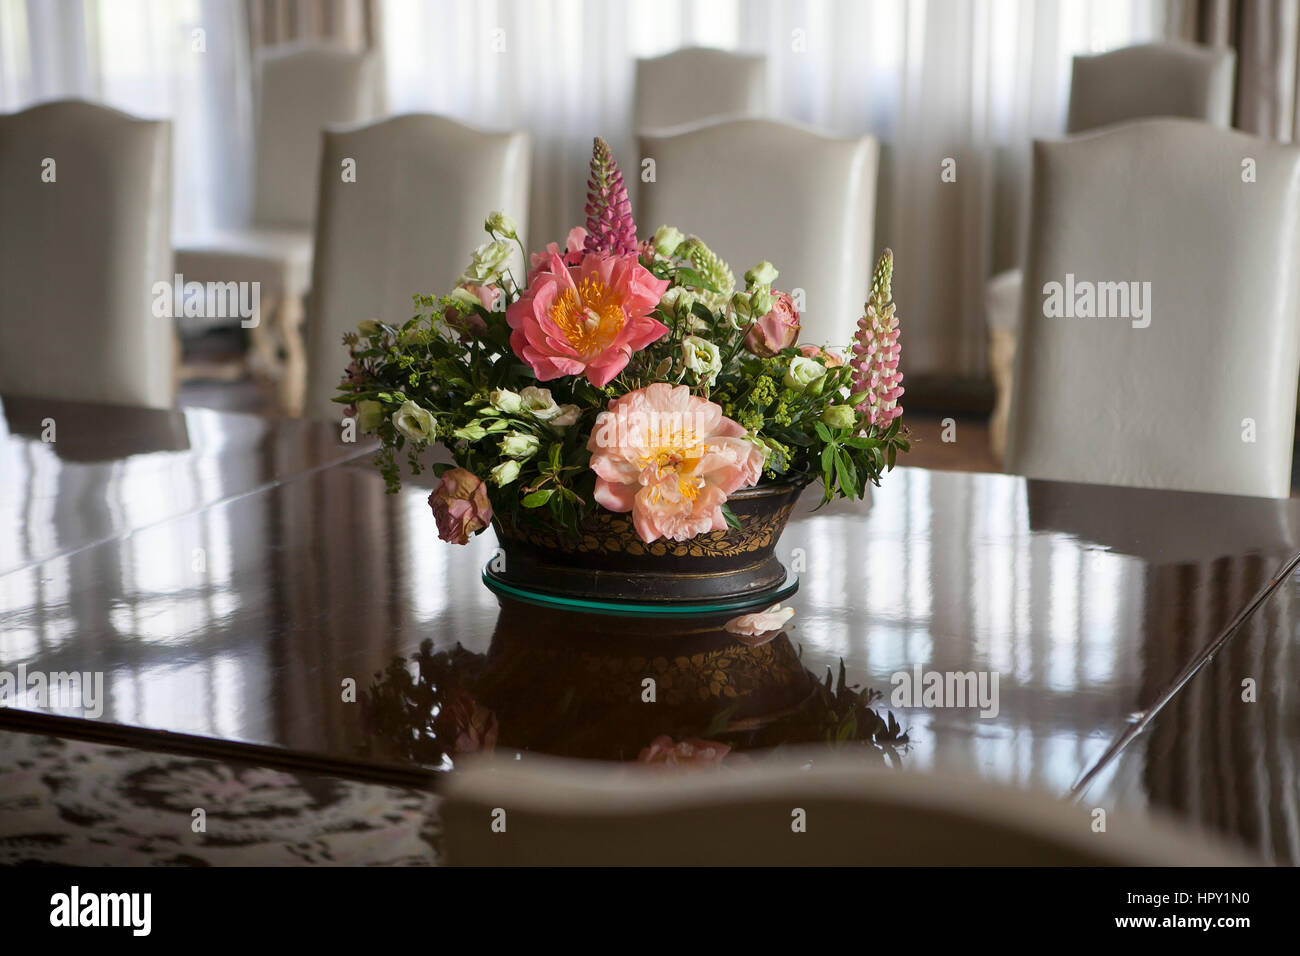 delicate bouquet of anemones, lilies, lupine, freesia stands on a glass table in the English interior Stock Photo